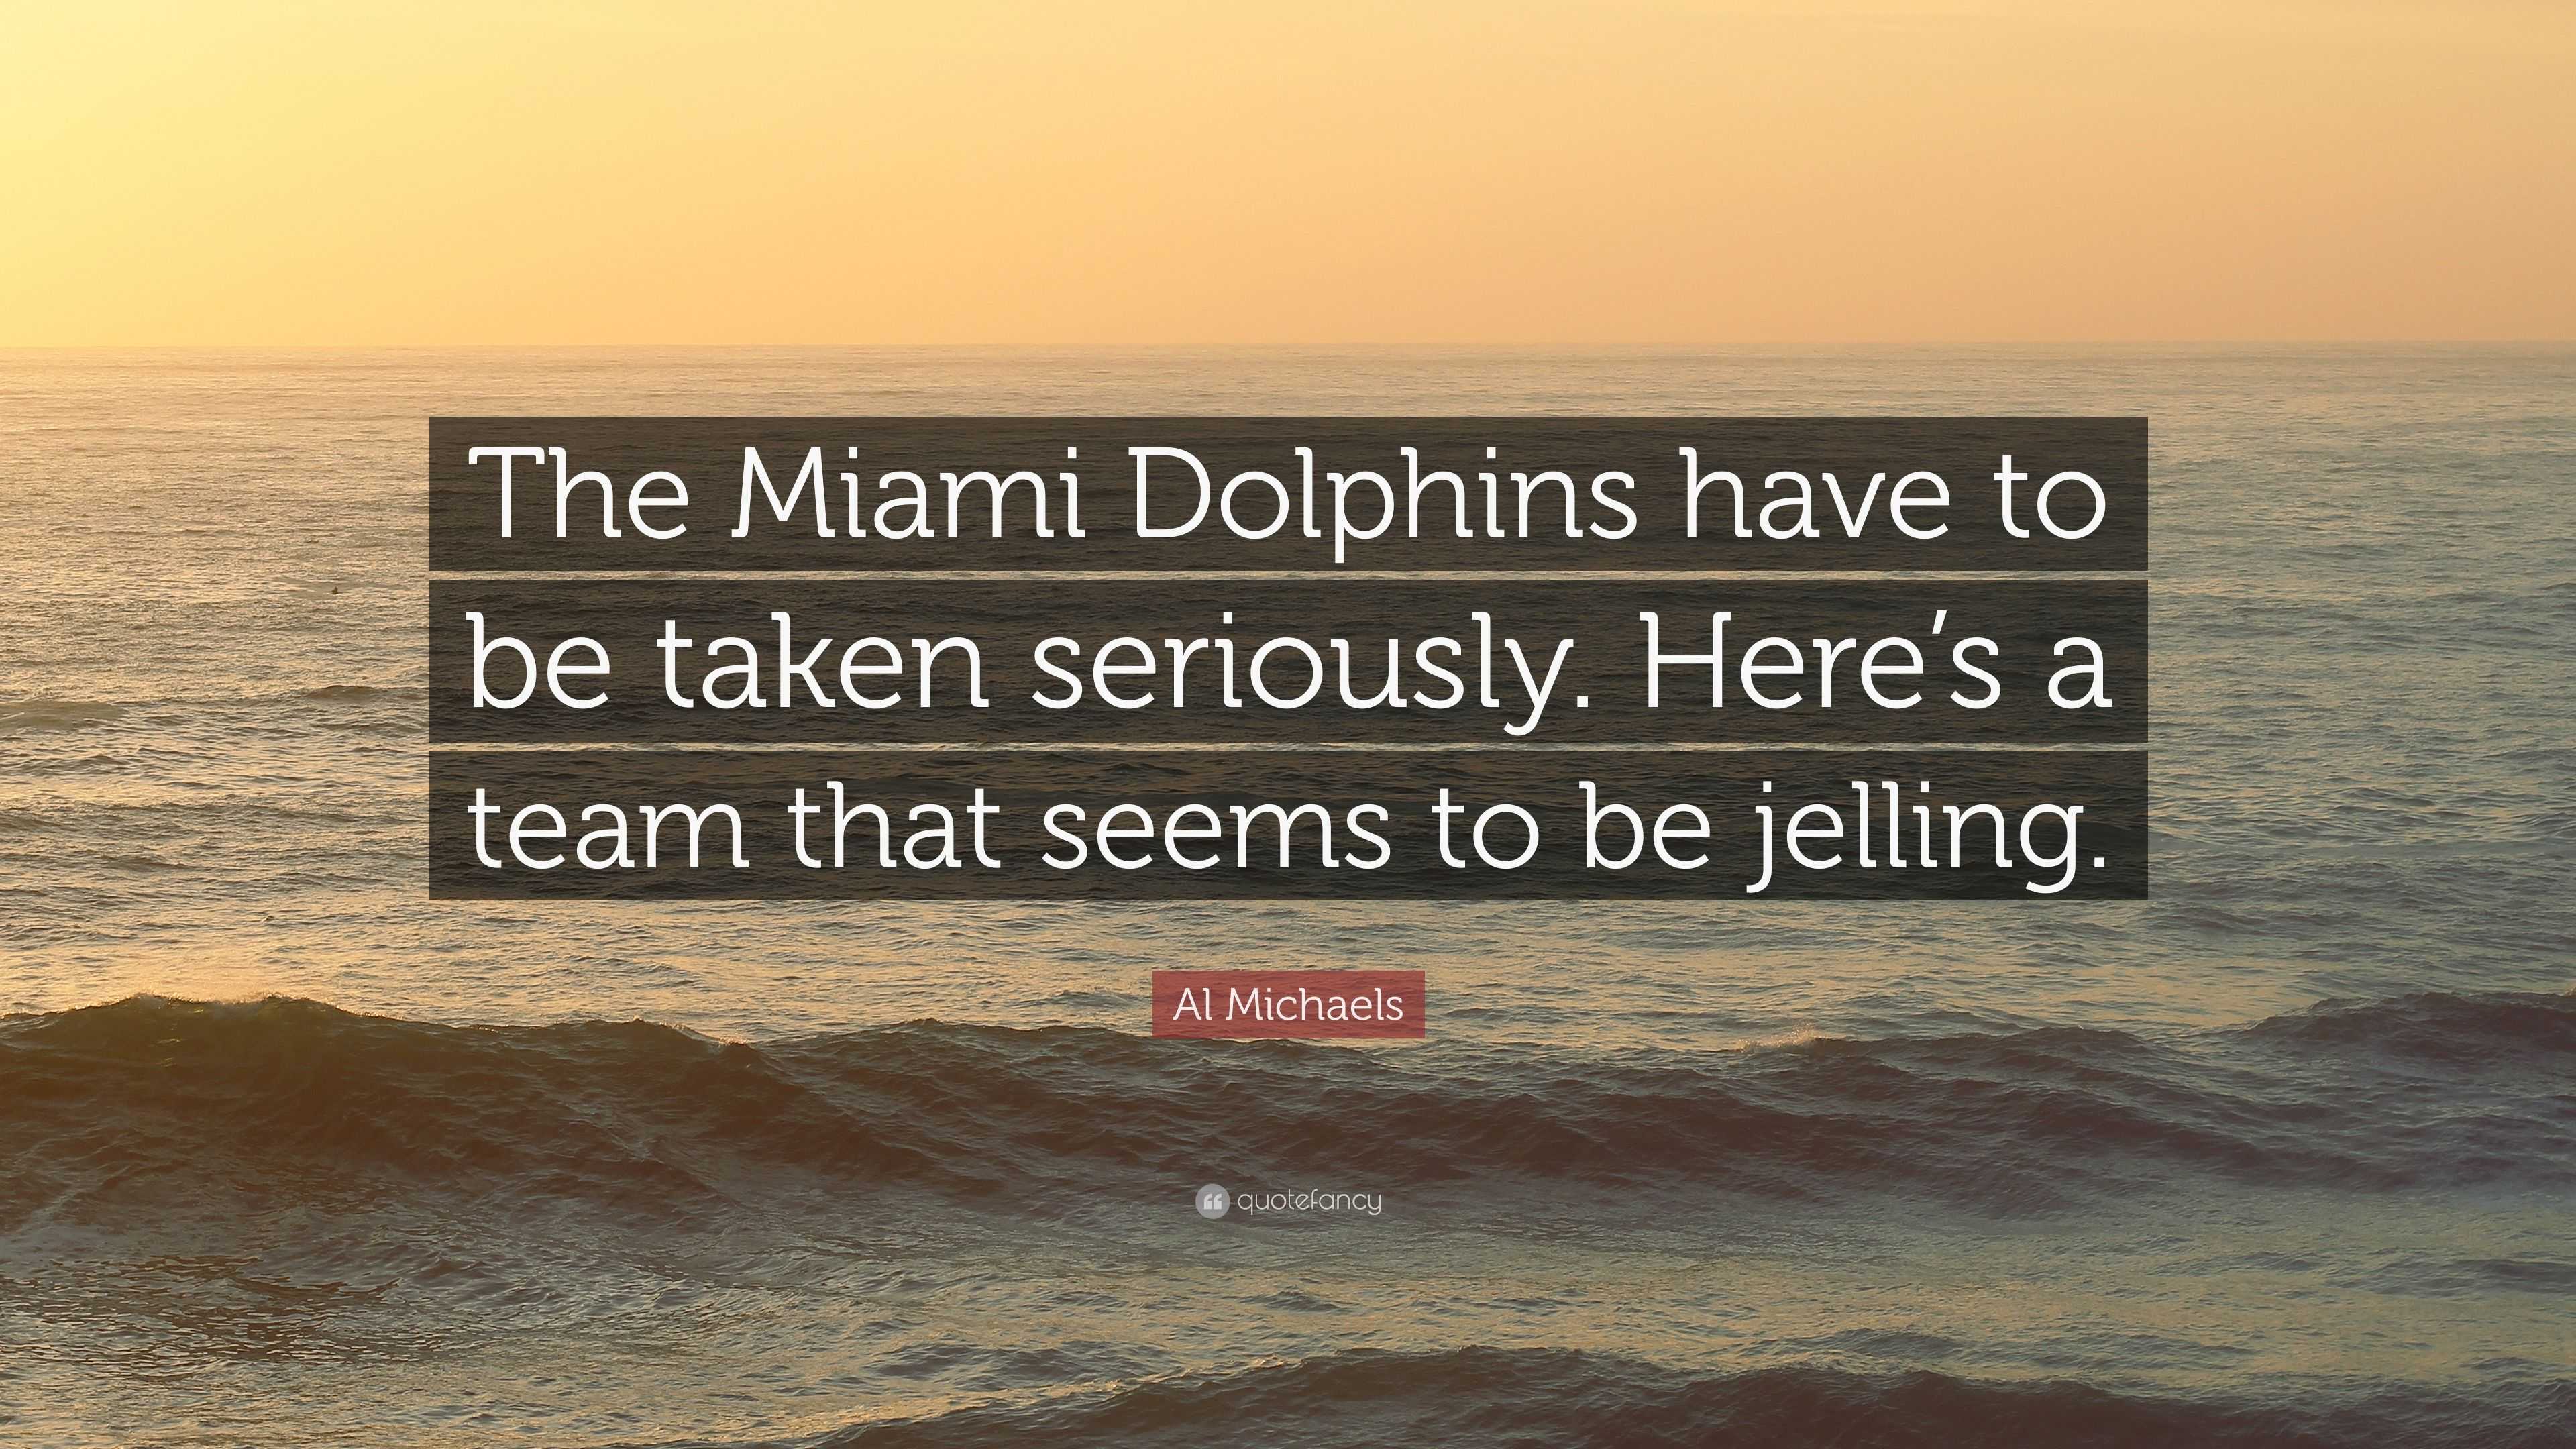 Al Michaels Quote: “The Miami Dolphins have to be taken seriously. Here's a  team that seems